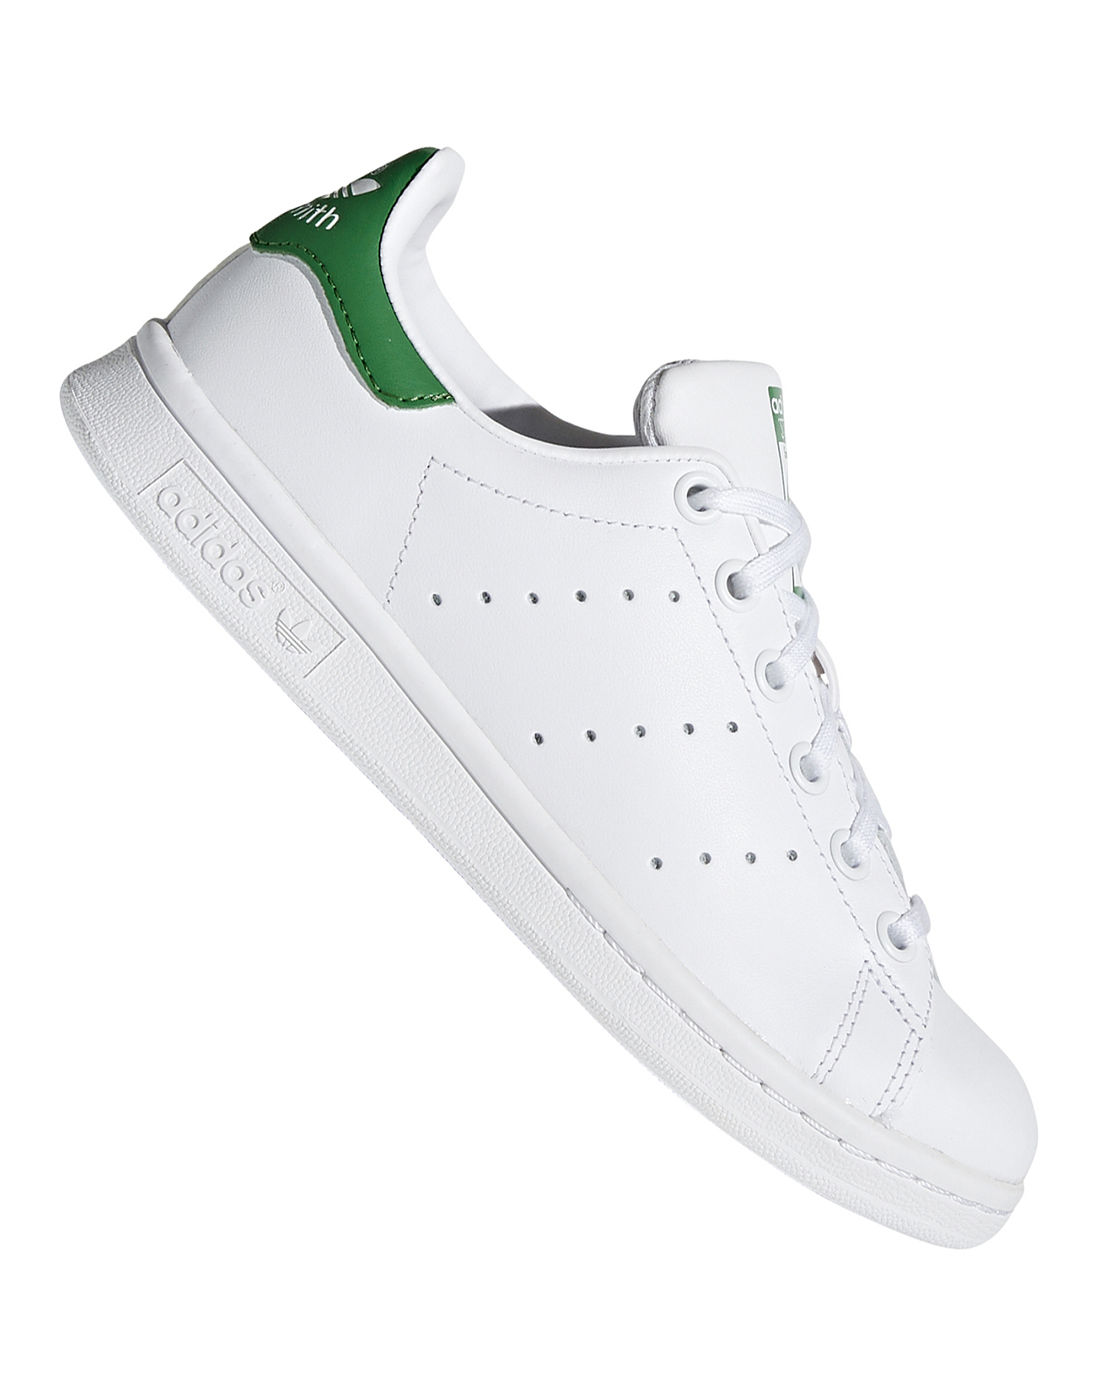 adidas stan smith old